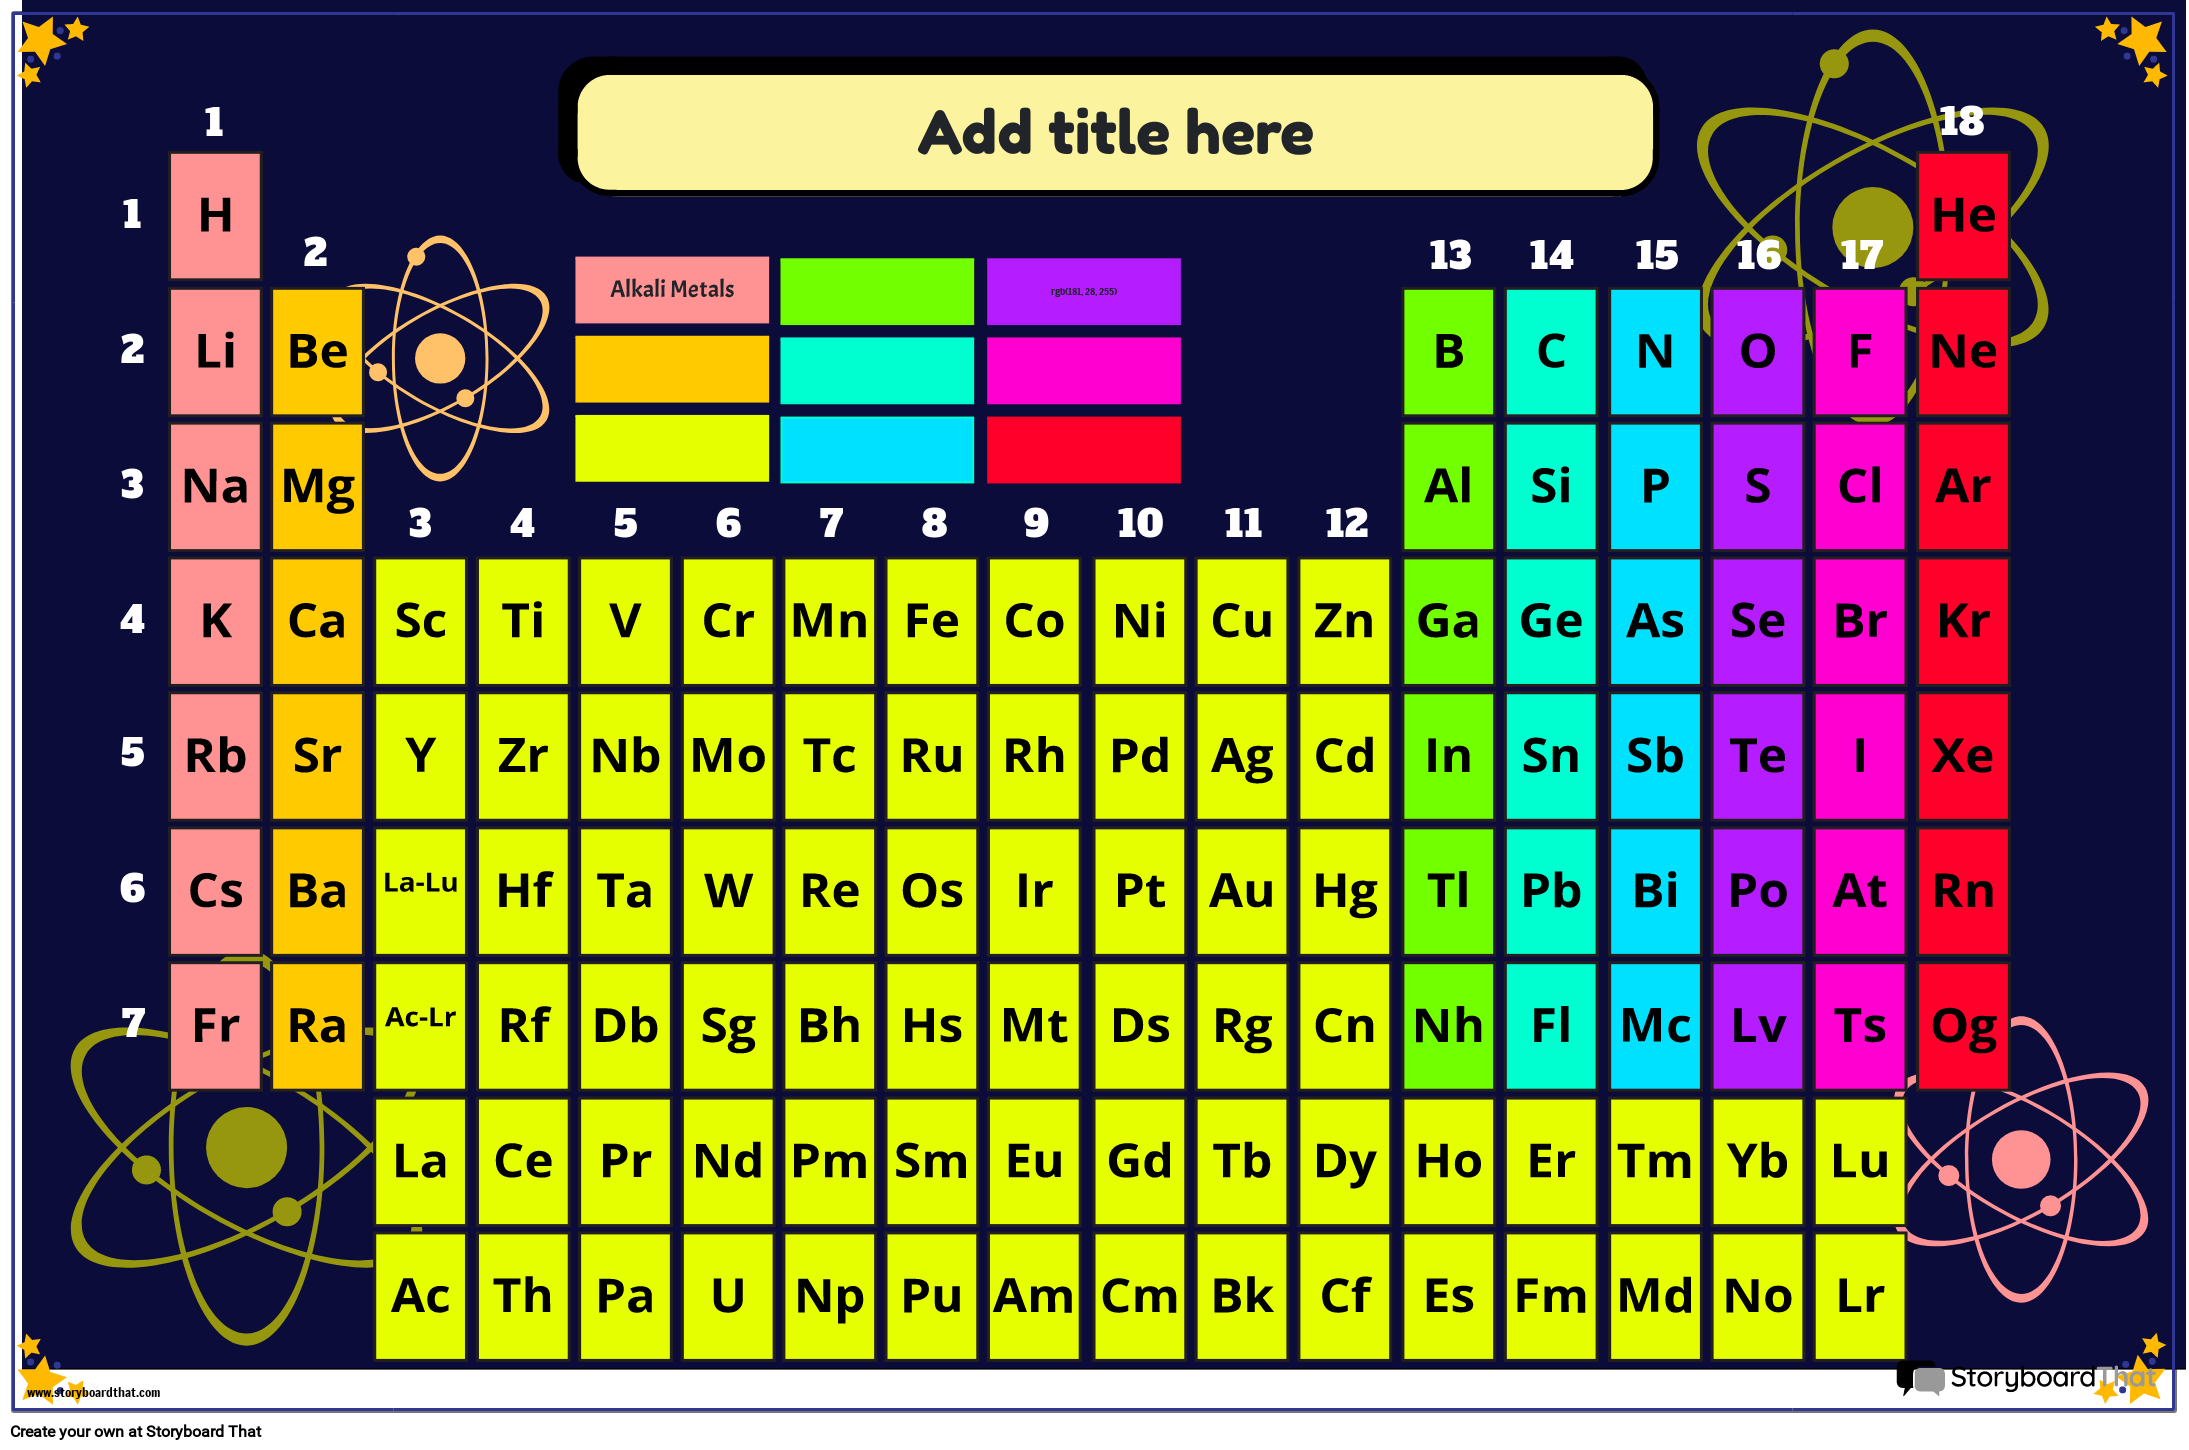 Star-themed Elements Graphic